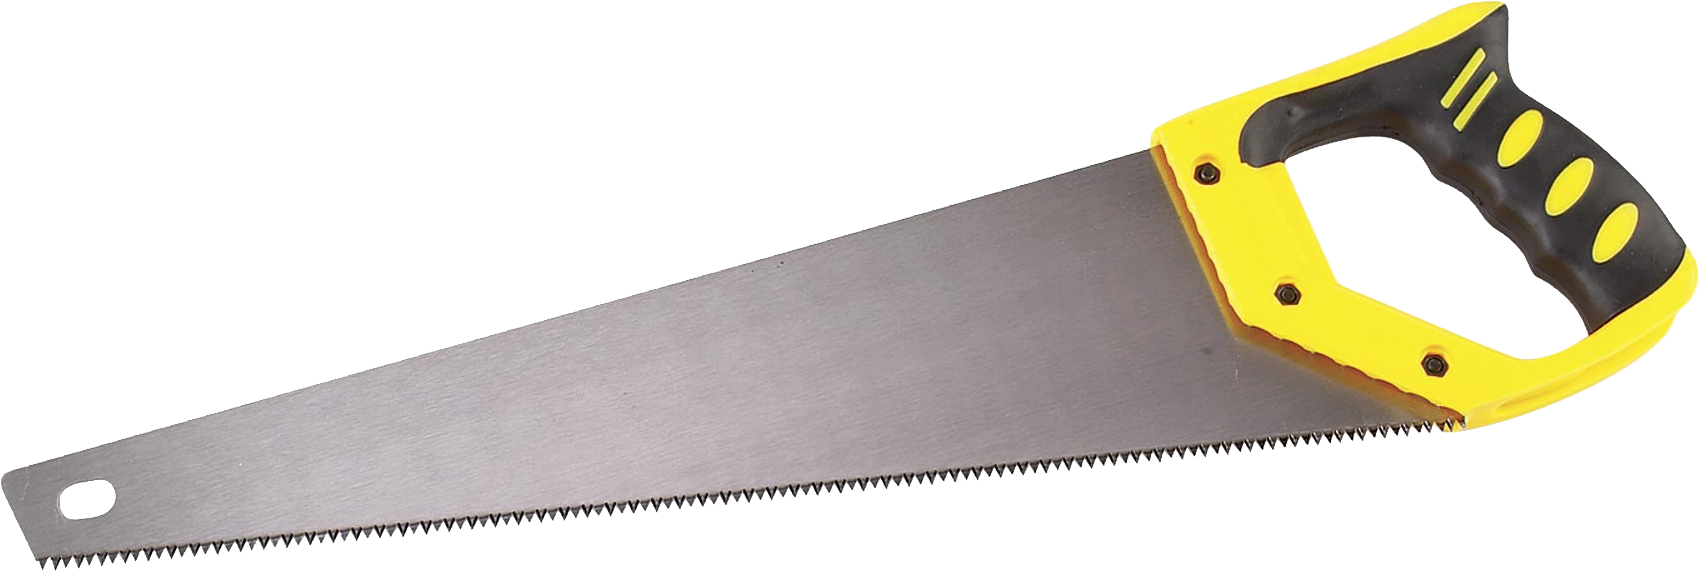 Hand Saw Png Image - Hand Saw, Transparent background PNG HD thumbnail